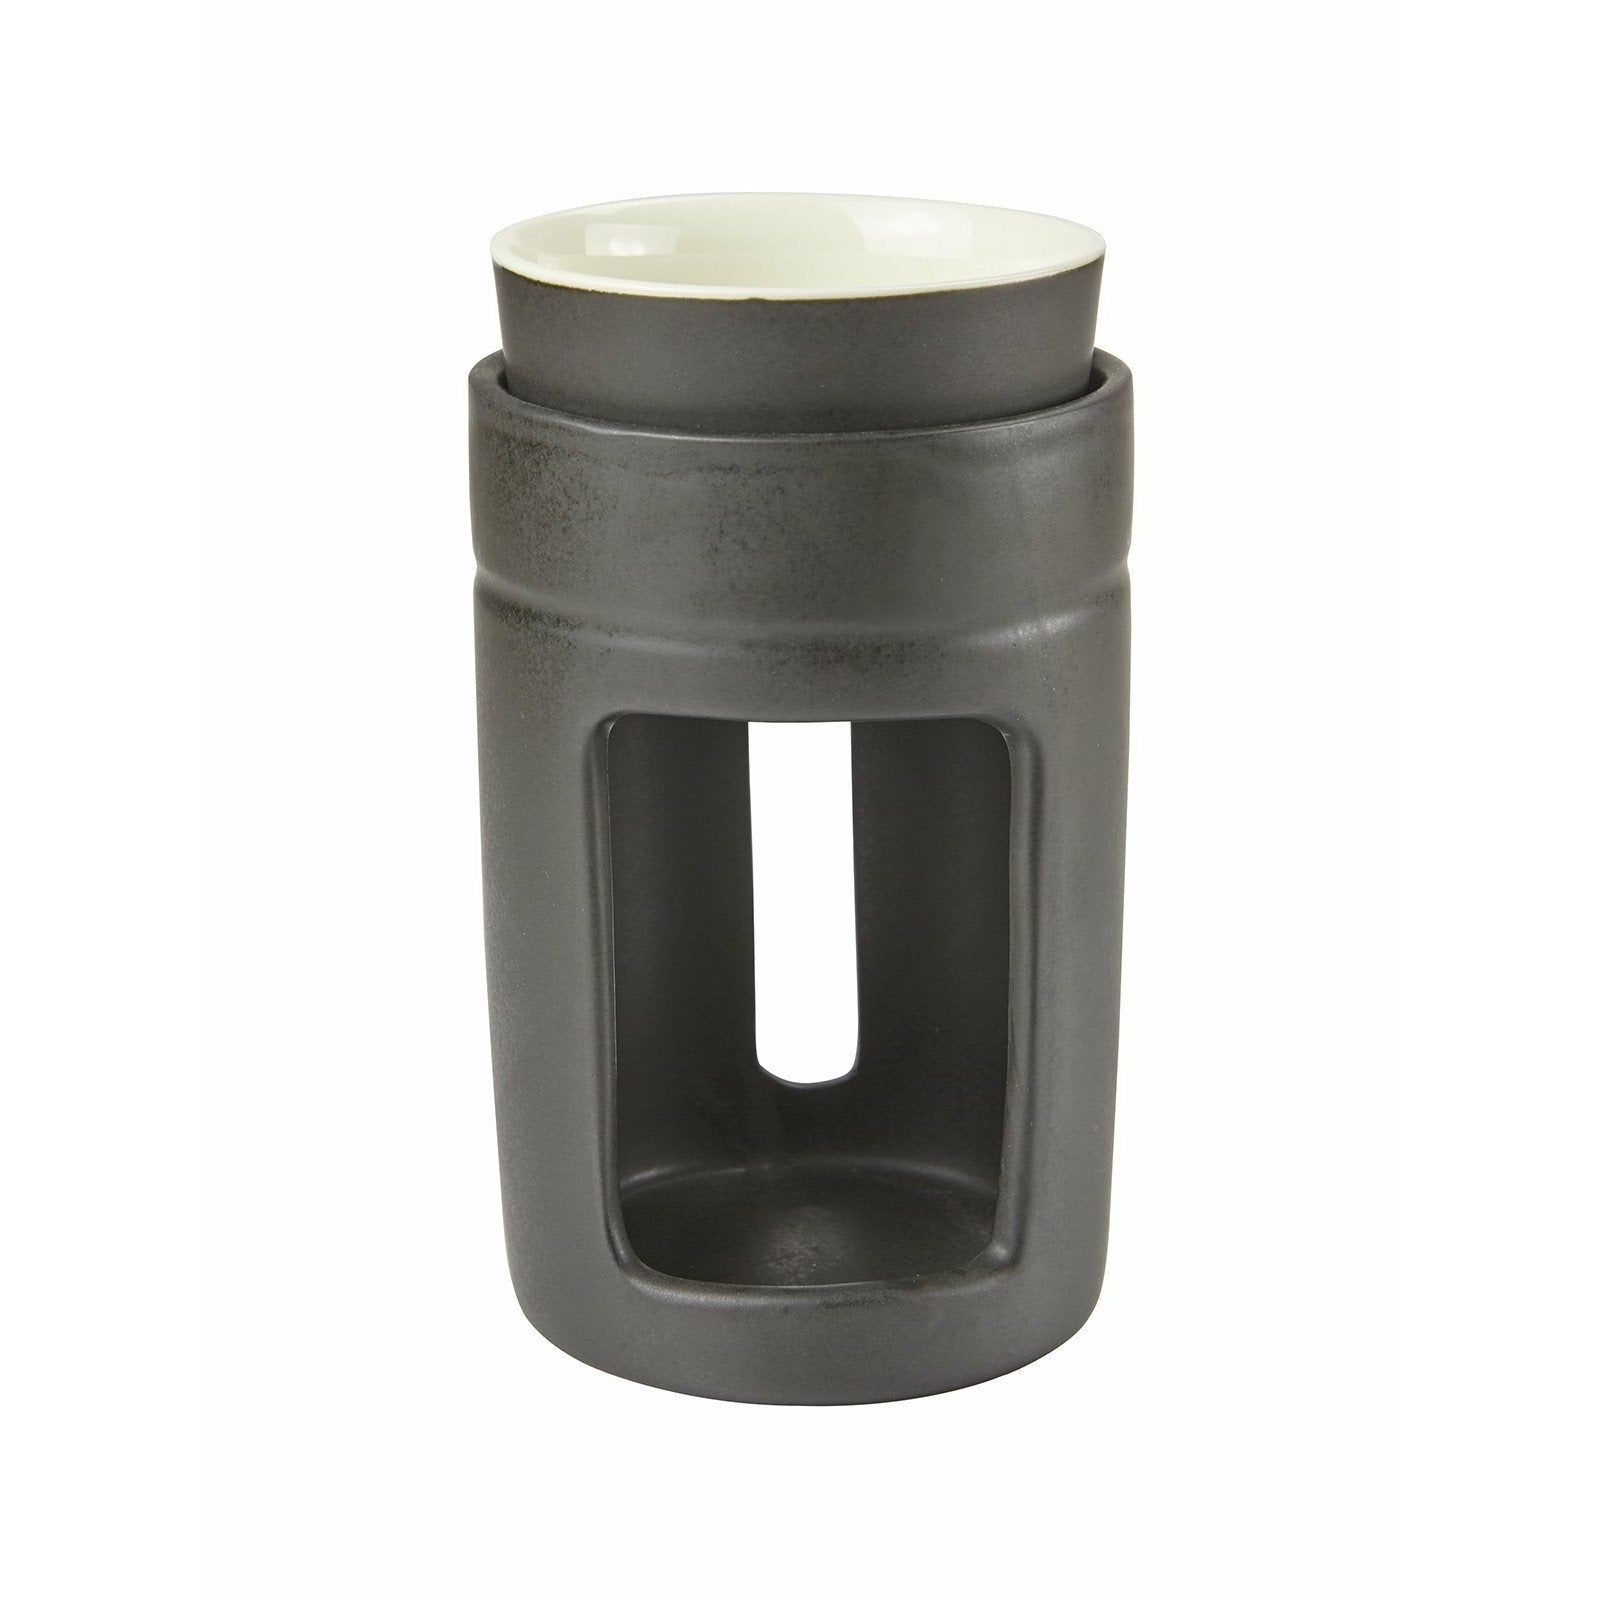 ACCESSORIES OIL BURNER CYLINDER BLK/WHITE Not specified